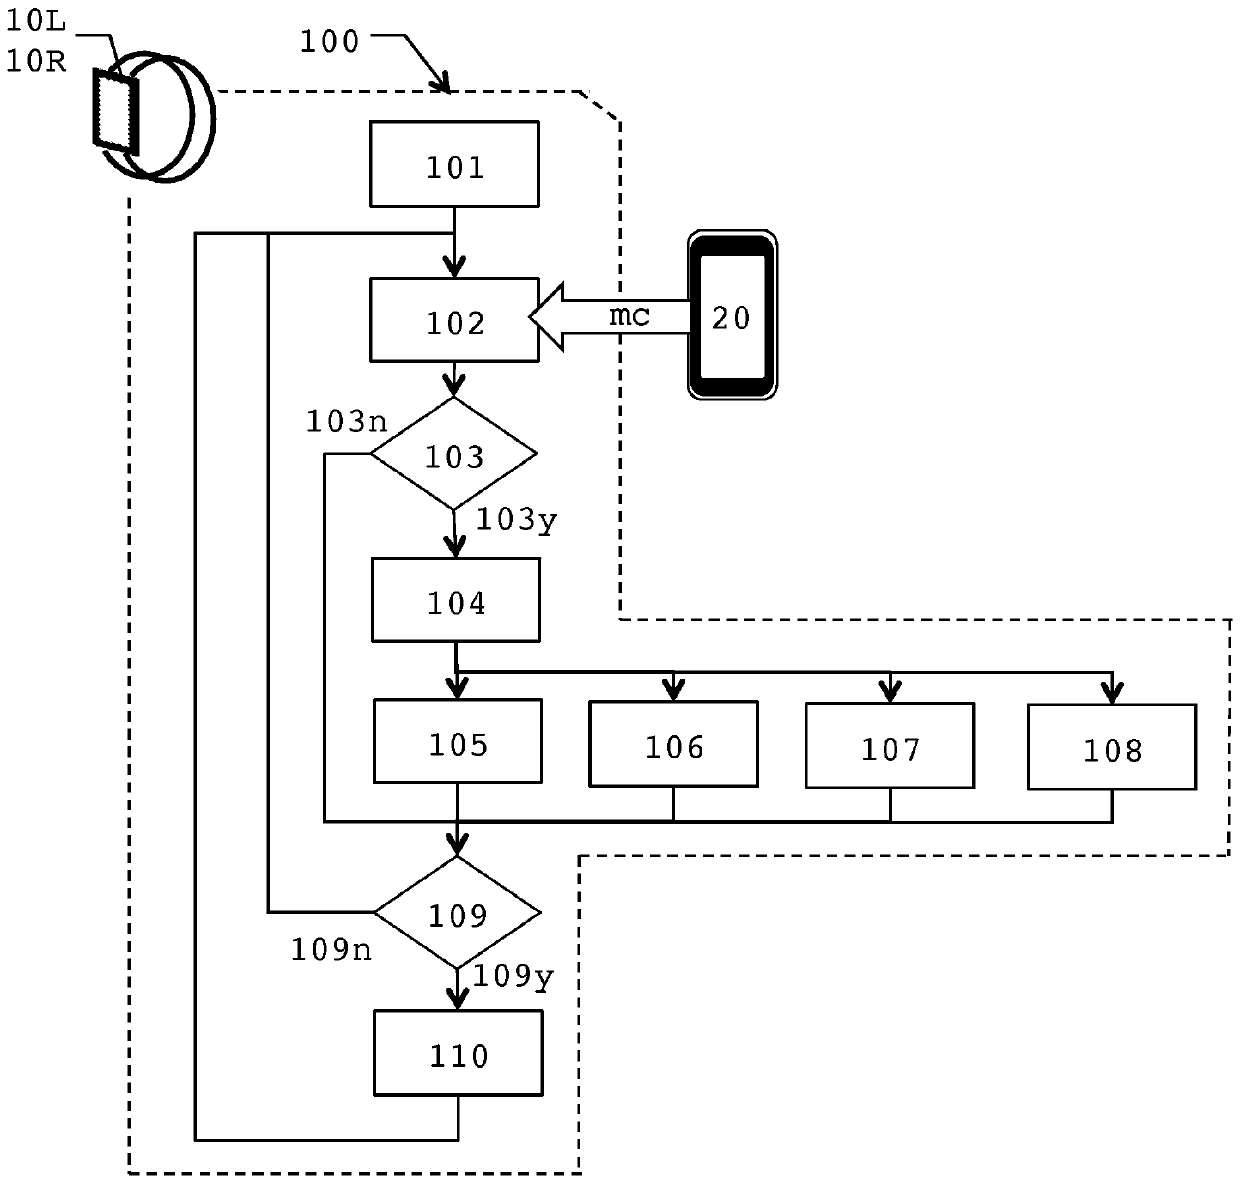 System for aiding navigation using visual and lateralized interfaces